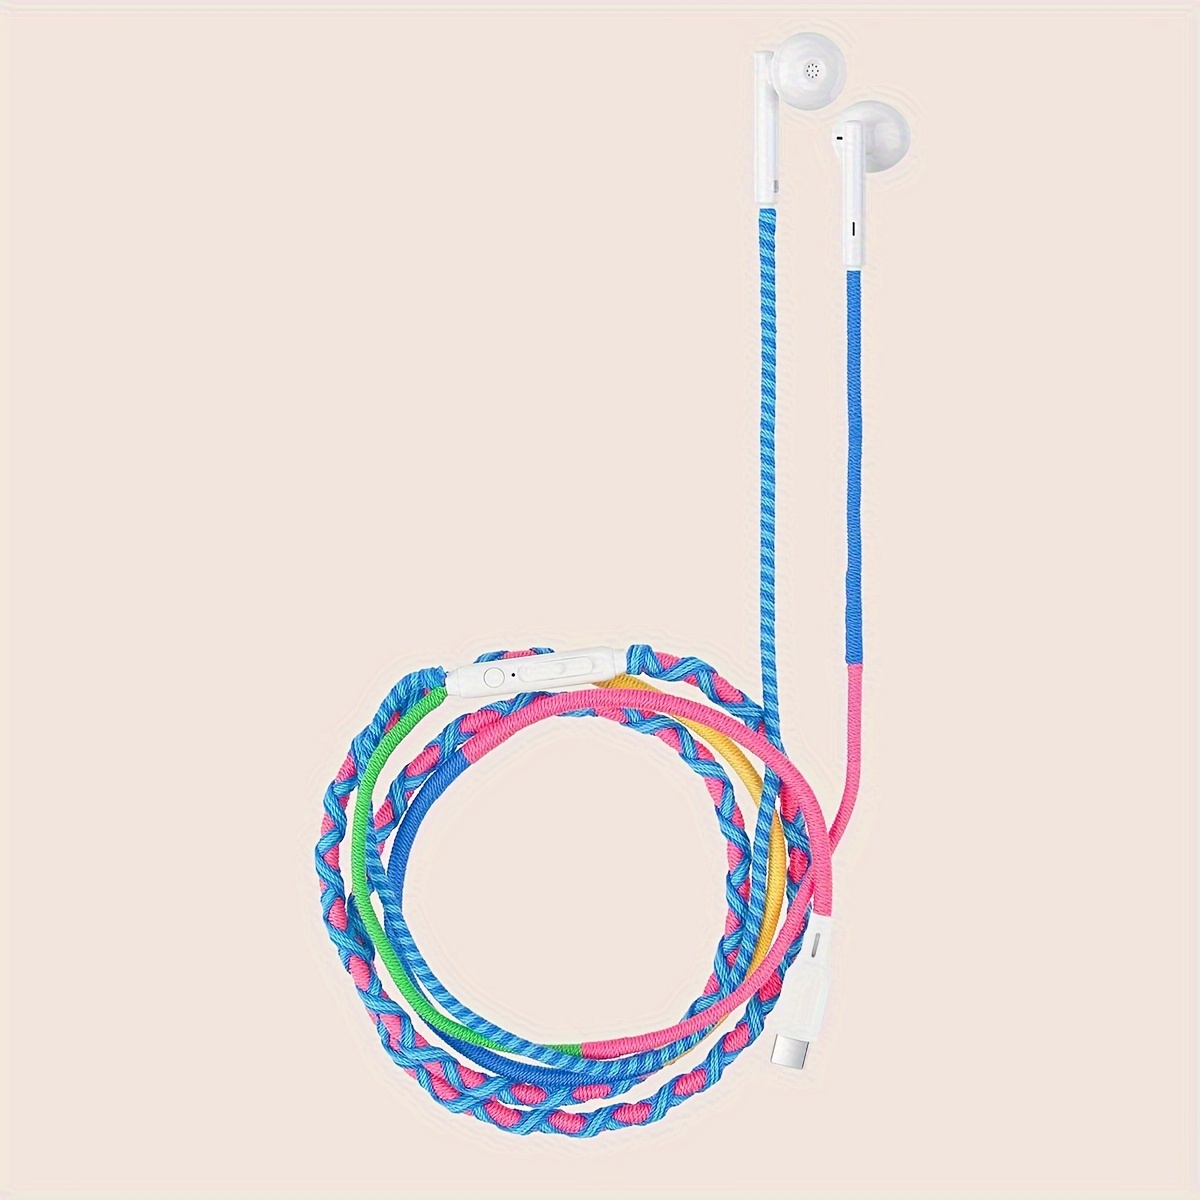 

Nylon Braided Usb C Earbuds - Wired Type C Headphones Colorful C Earphones With Mic And Volume Control For Samsung/xiaomi